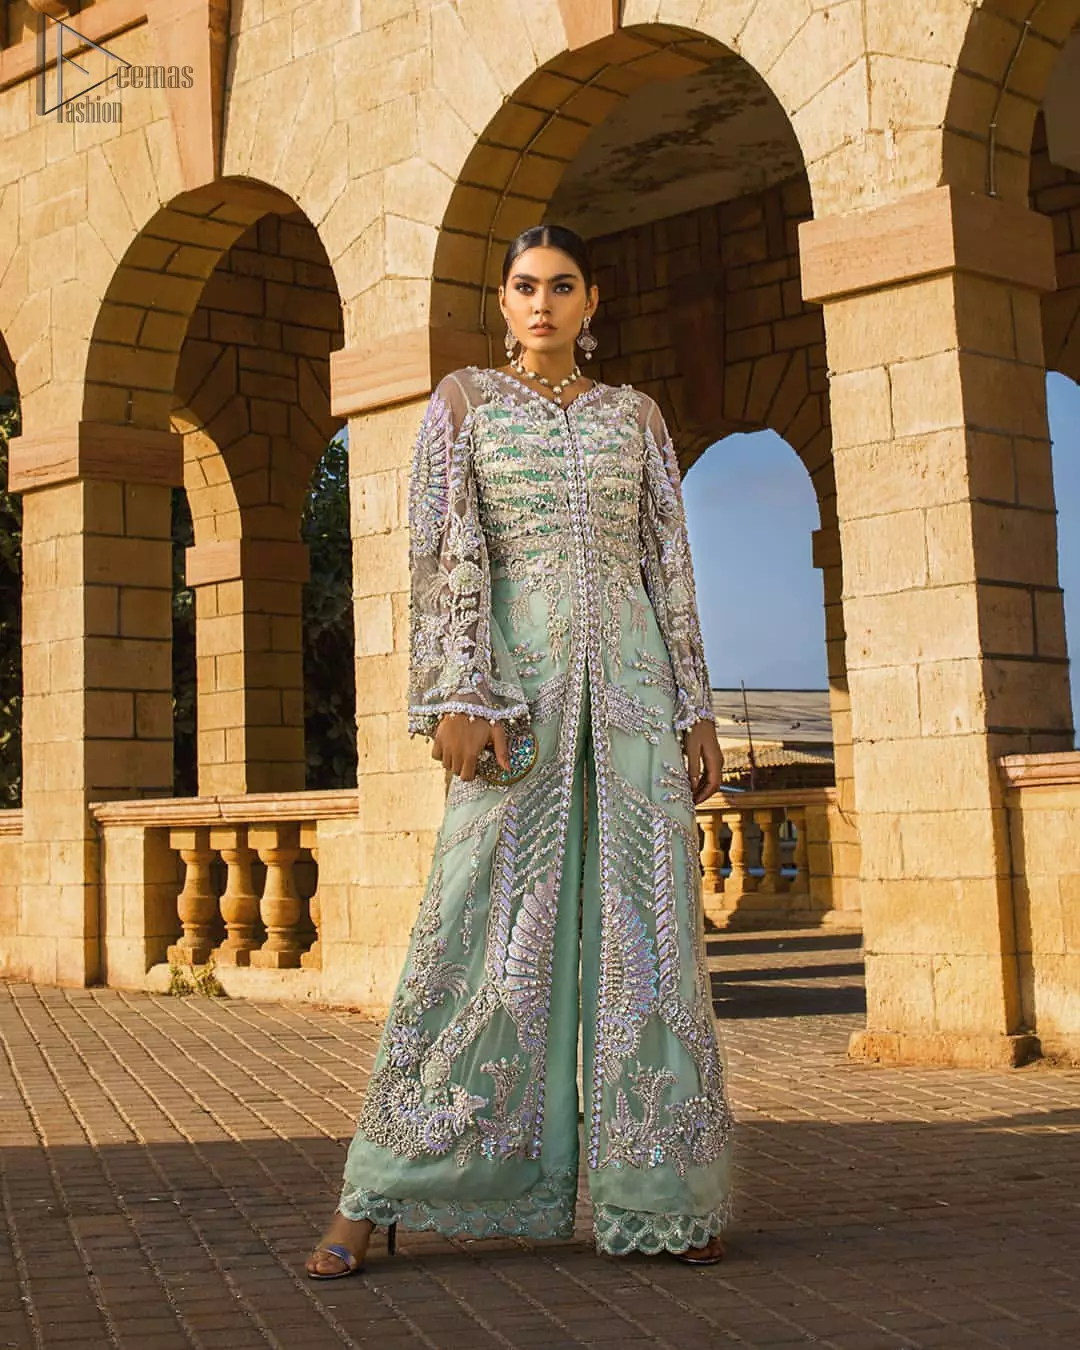 Take a step towards refreshing your wardrobe with aqua front open gown and palazzo pants. This front open gown is perfected with loaded light golden and silver work. The front of the gown is heavily embellished with different styles motifs and rich embellishment on bodice. Furthermore the back of the gown and bell sleeves are also decorated with detailed embroidery and dangling balls. The palazzo pants with it is made of raw silk fabric with lace detail on the bottom. The outfit is coordinated with aqua organza dupatta sprinkled with sequins all over.